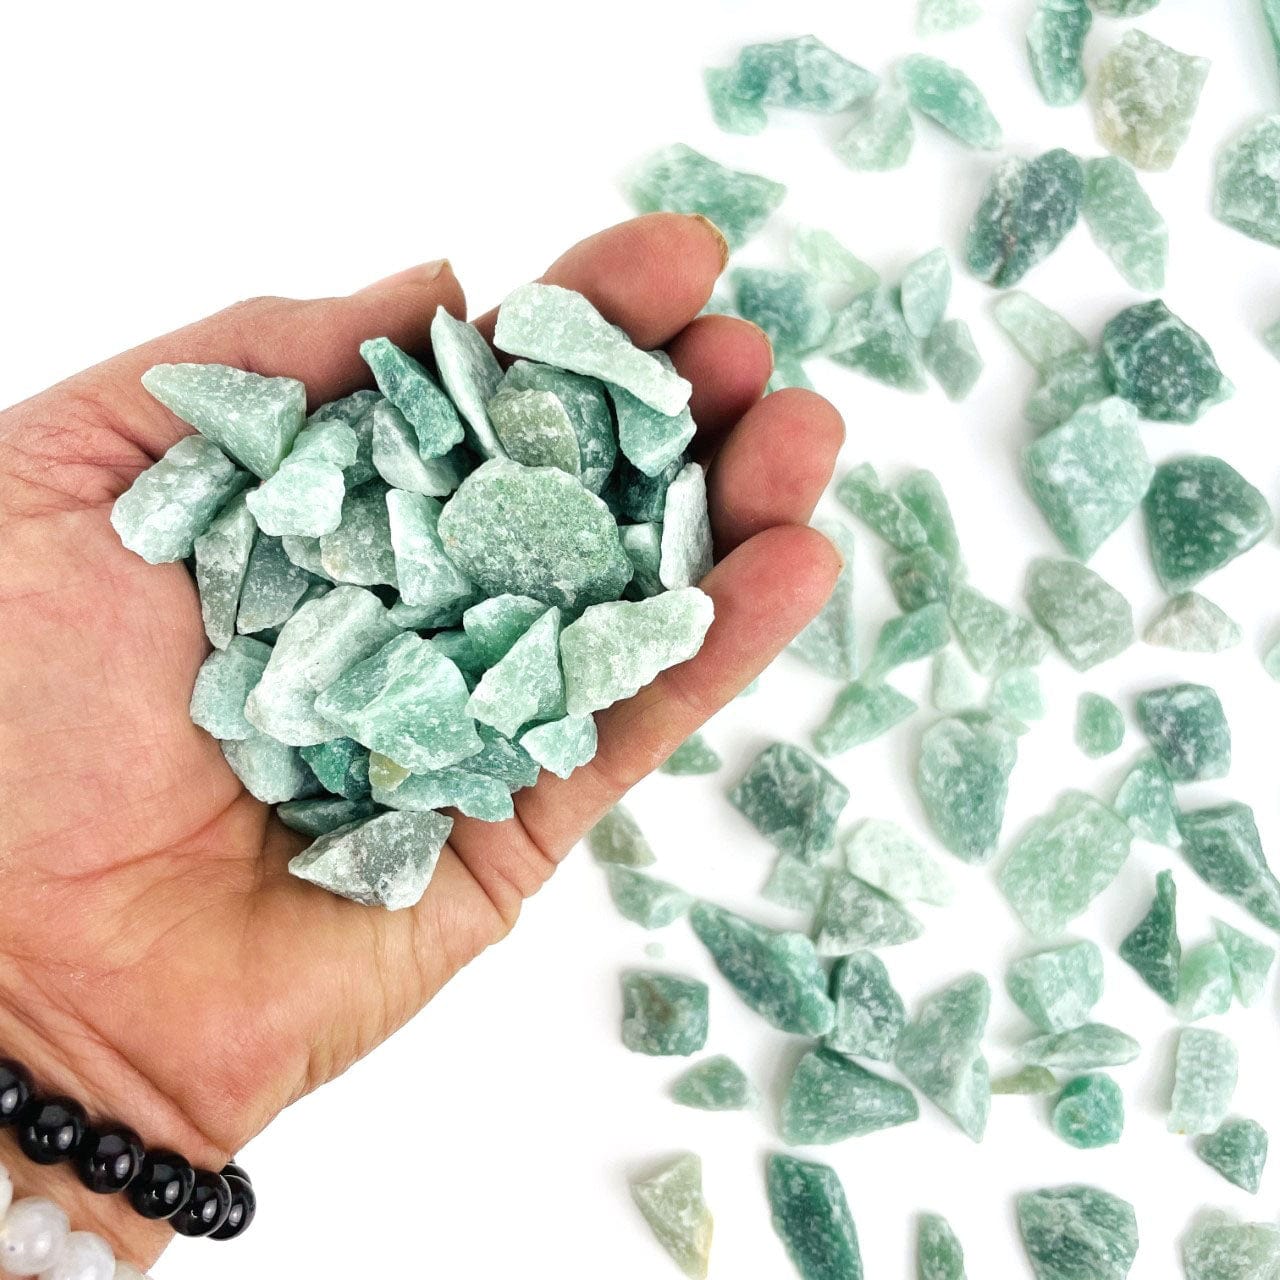 Green Quartz Stones  in a hand for size approximately 150 grams, 1 bag